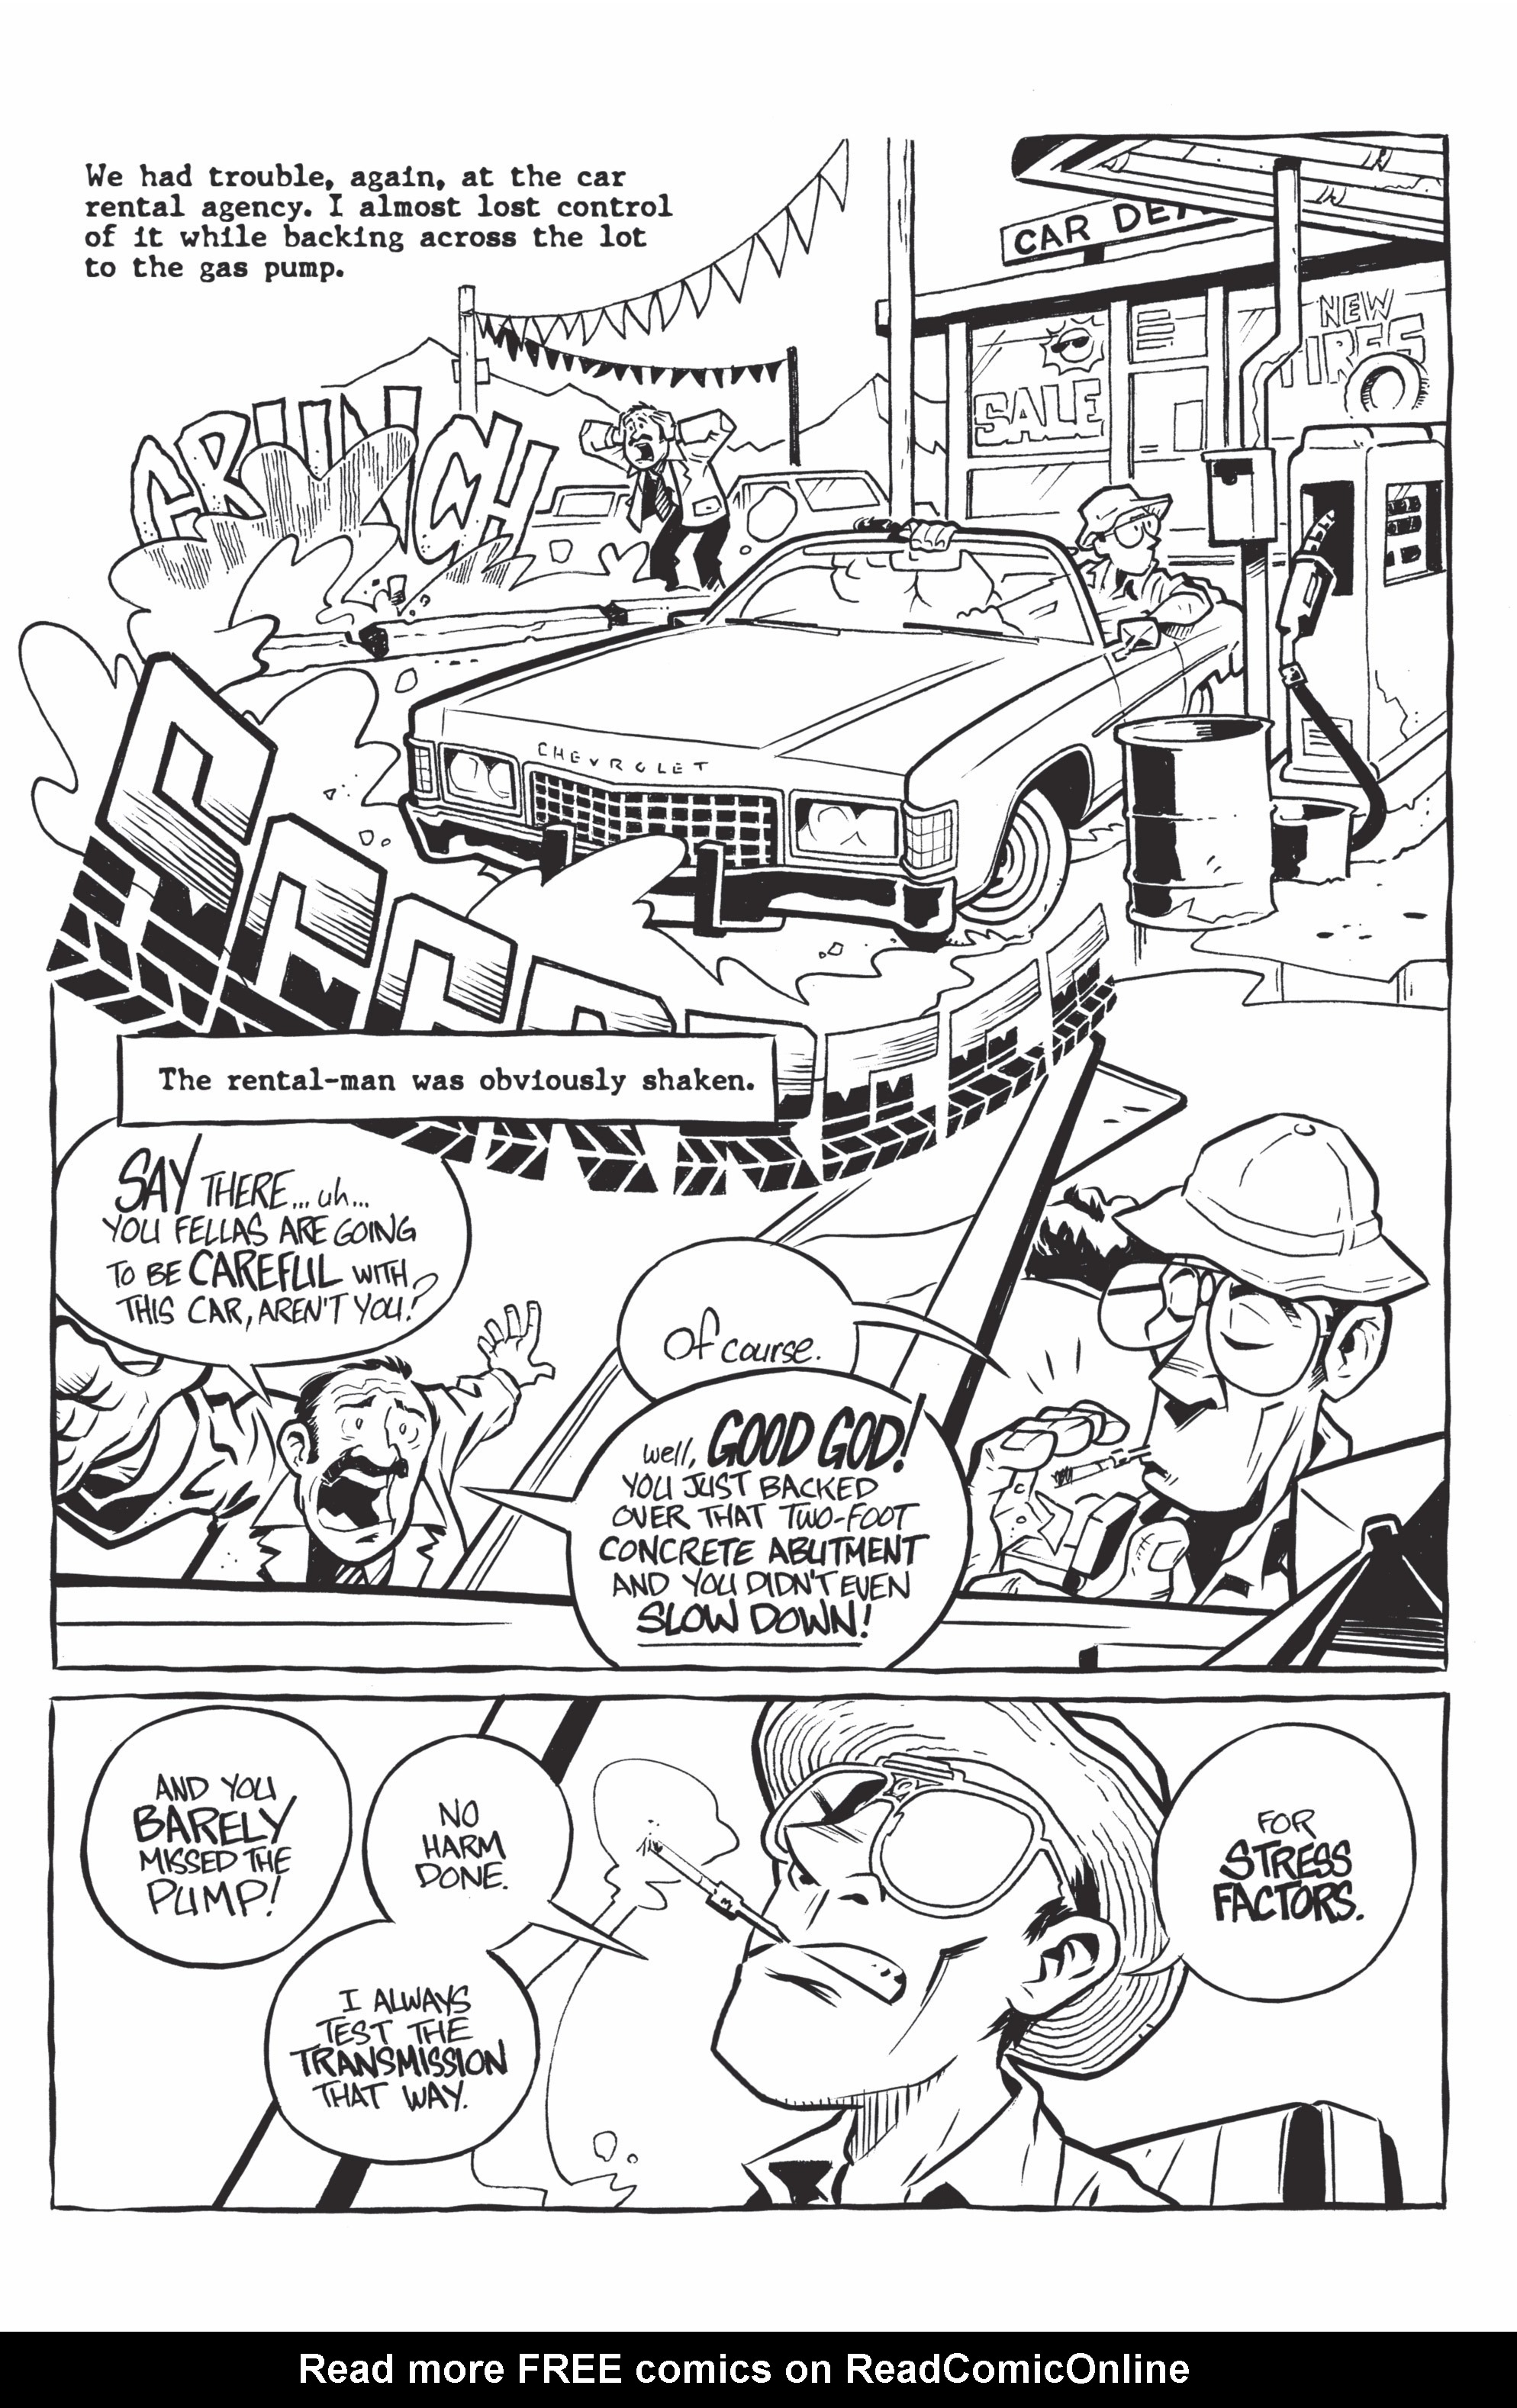 Read online Hunter S. Thompson's Fear and Loathing in Las Vegas comic -  Issue #1 - 19